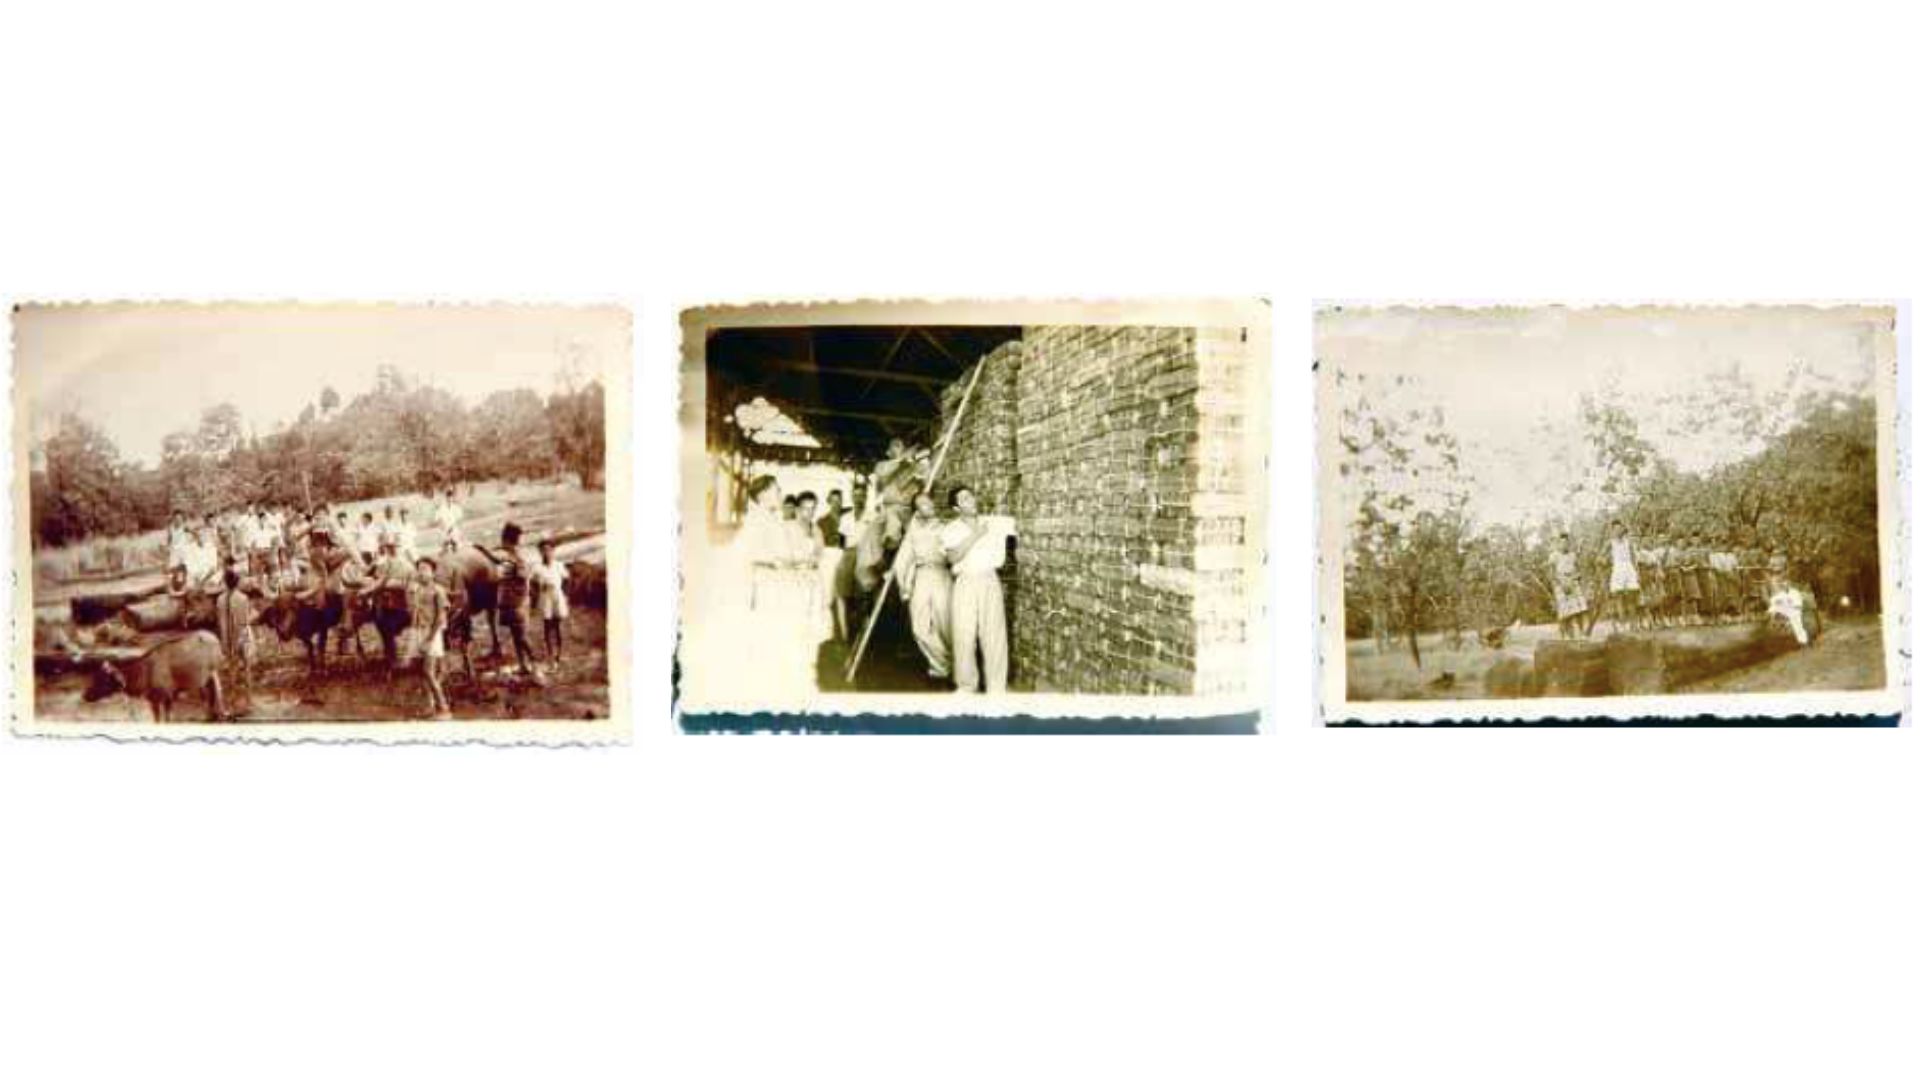 Three faded photographs. The first a group of people and buffalo. Second, a group of people next to stacked teak logs. Third, a group of people standing on a tree that has been cut down.